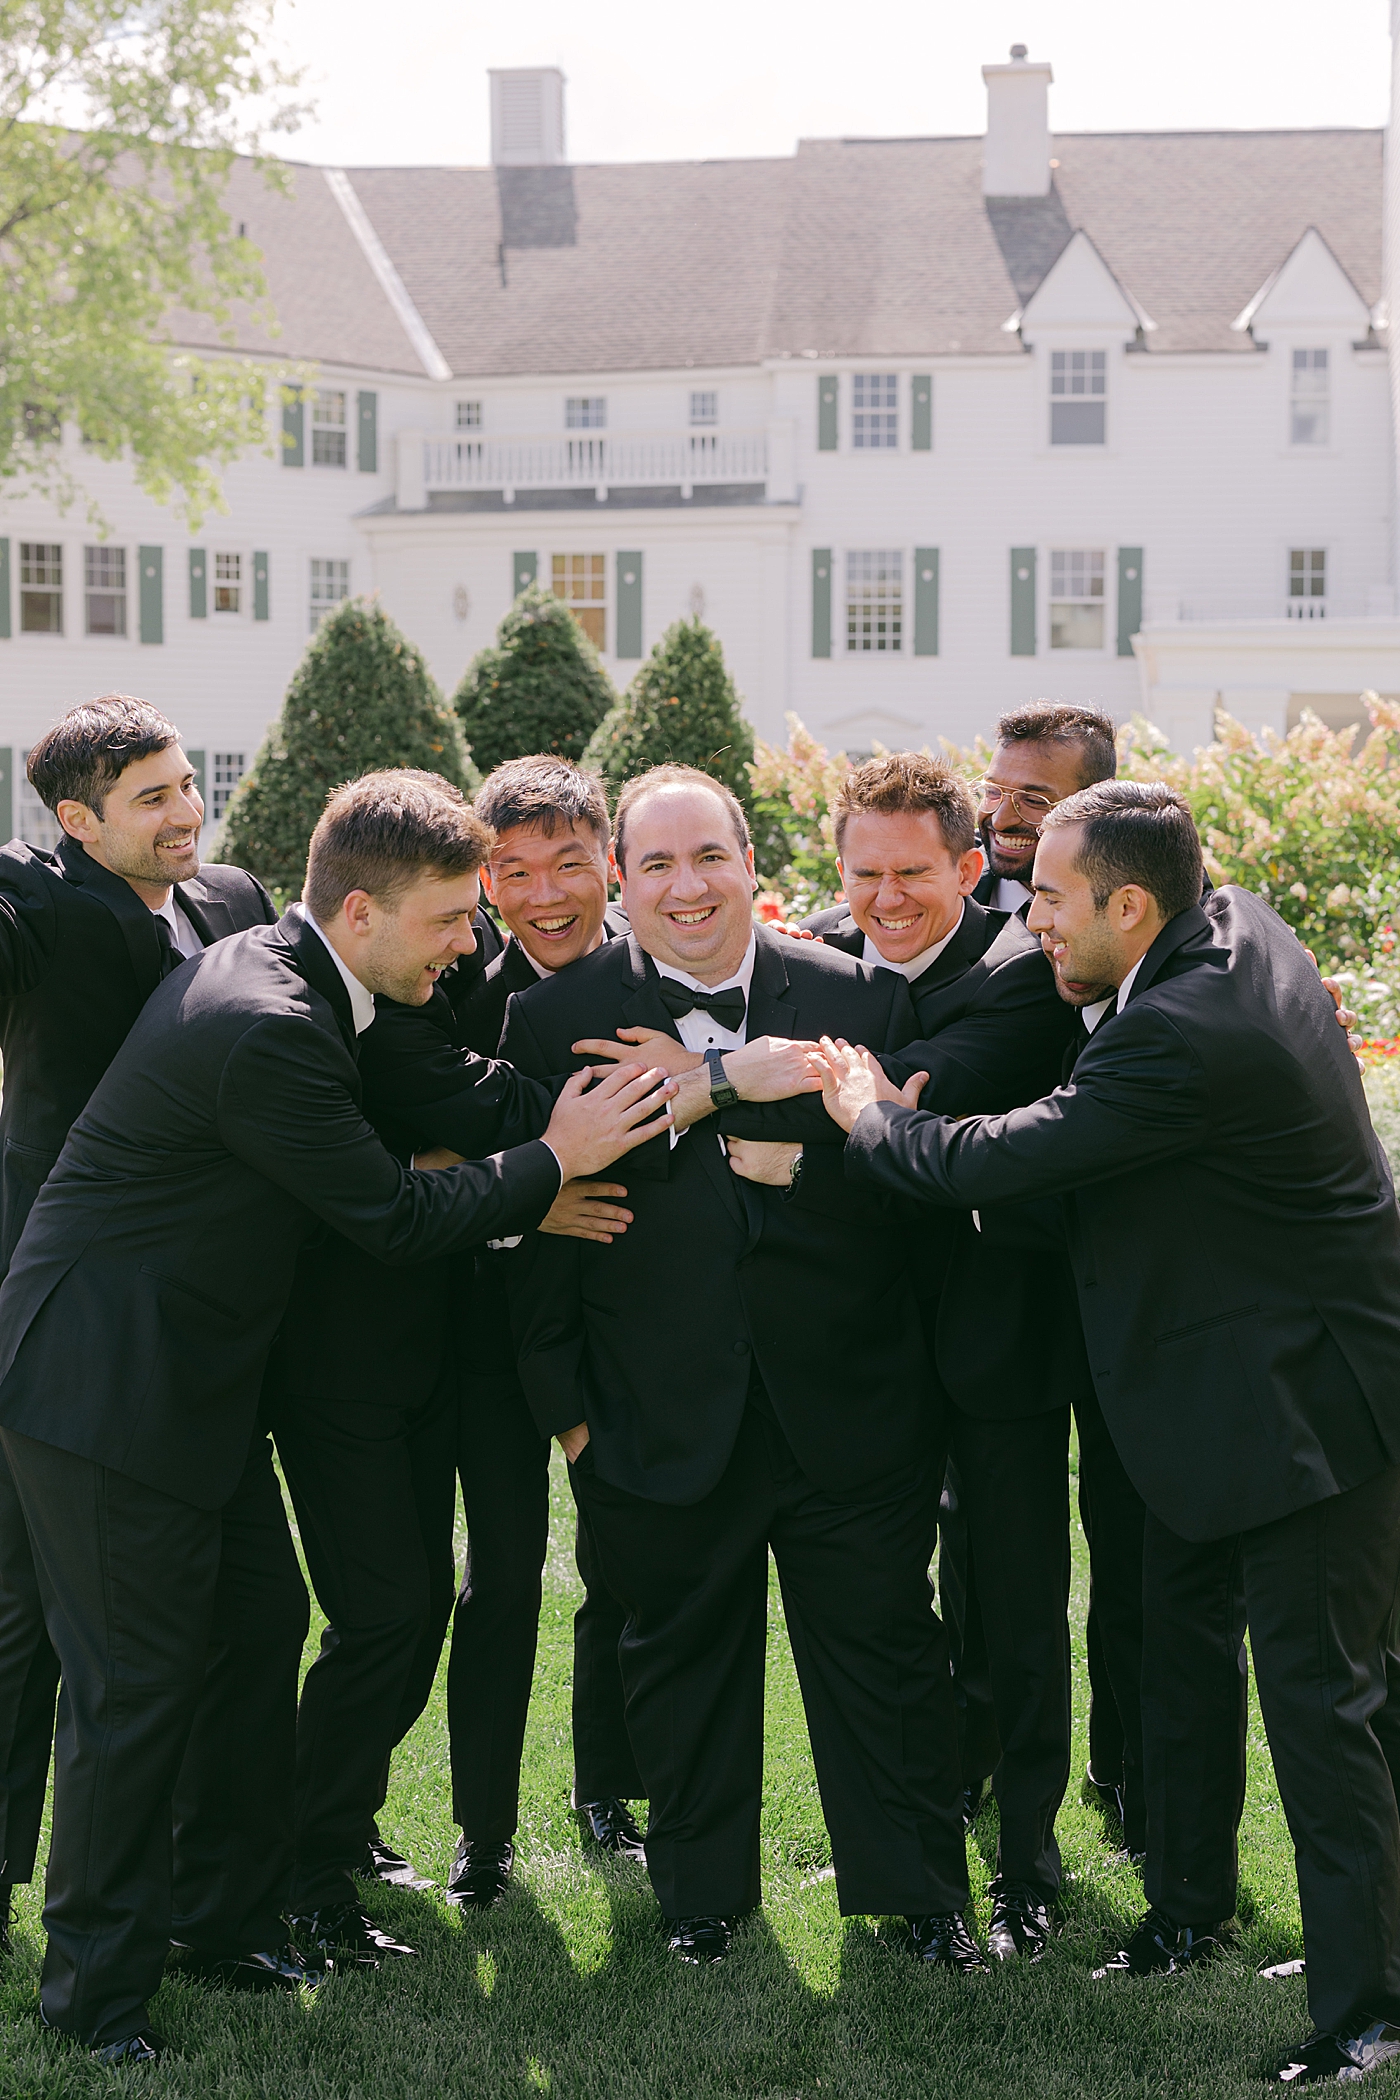 Informal portrait of a groom and his groomsmen | Image by Hope Helmuth Photography